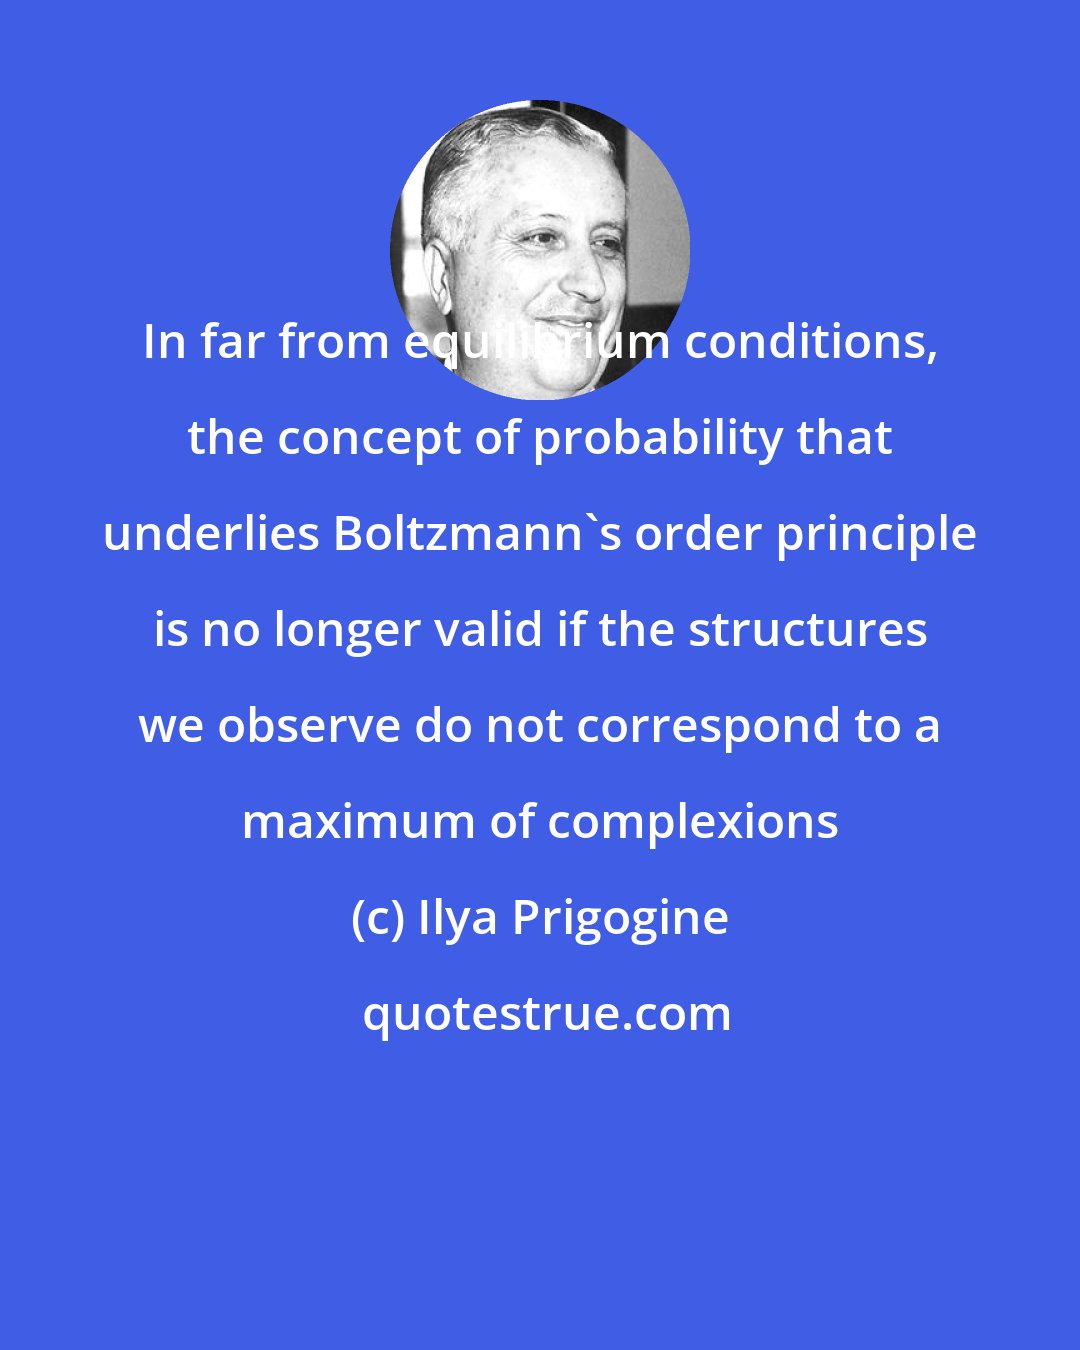 Ilya Prigogine: In far from equilibrium conditions, the concept of probability that underlies Boltzmann's order principle is no longer valid if the structures we observe do not correspond to a maximum of complexions